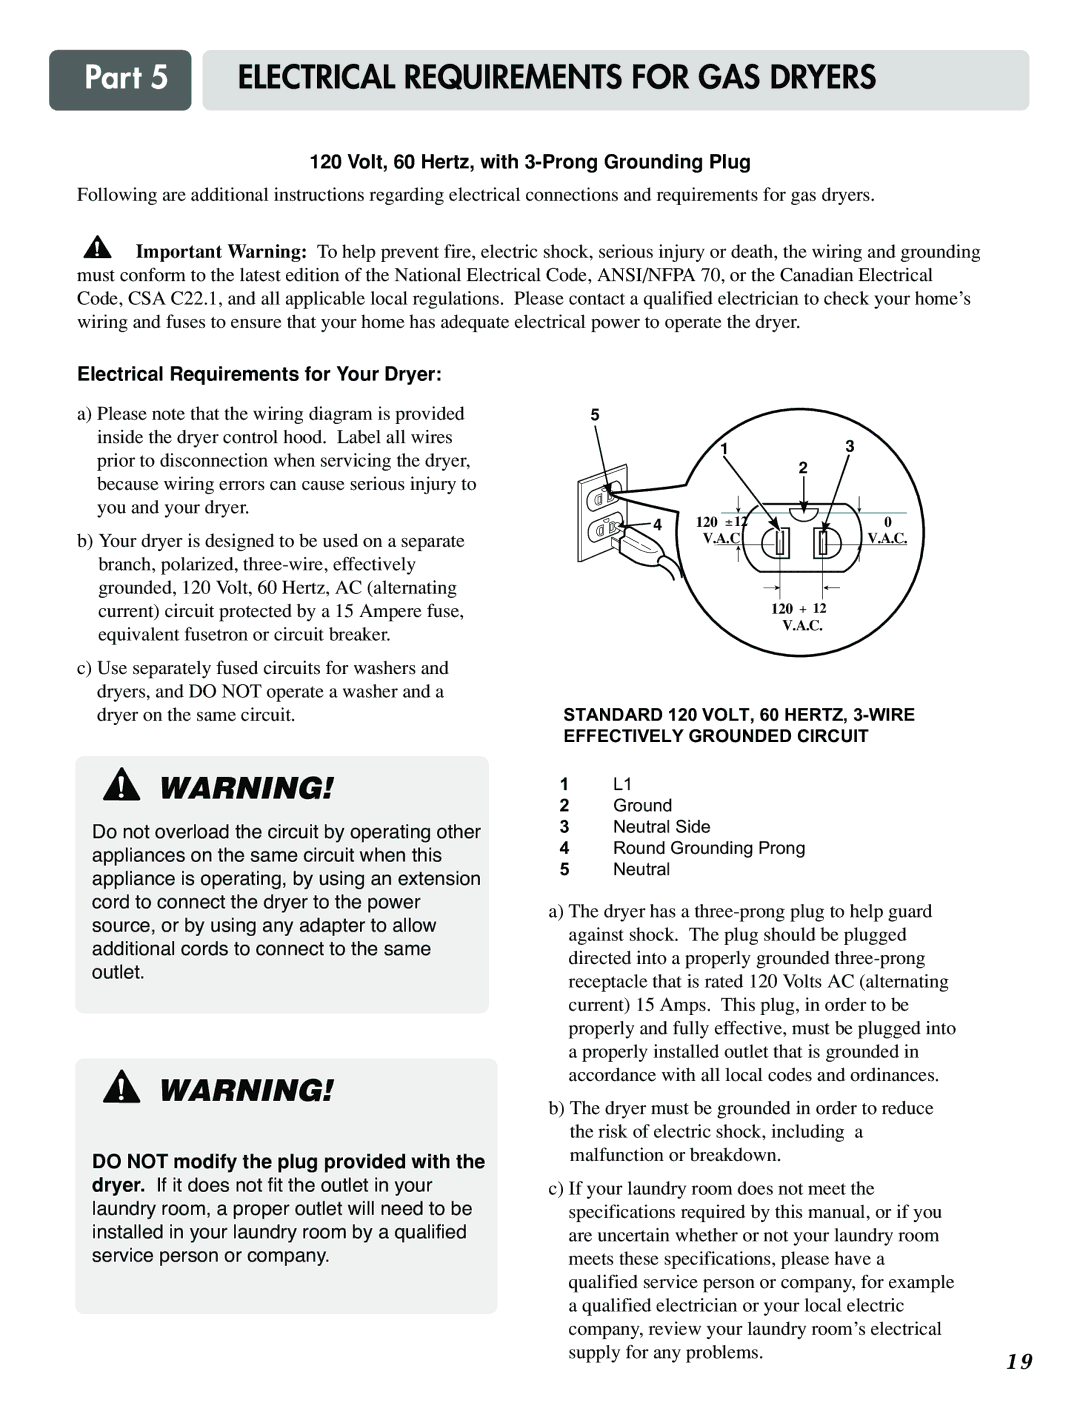 LG Electronics D3788W, D5988B Part 5 Electrical Requirements for GAS Dryers, Volt, 60 Hertz, with 3-Prong Grounding Plug 